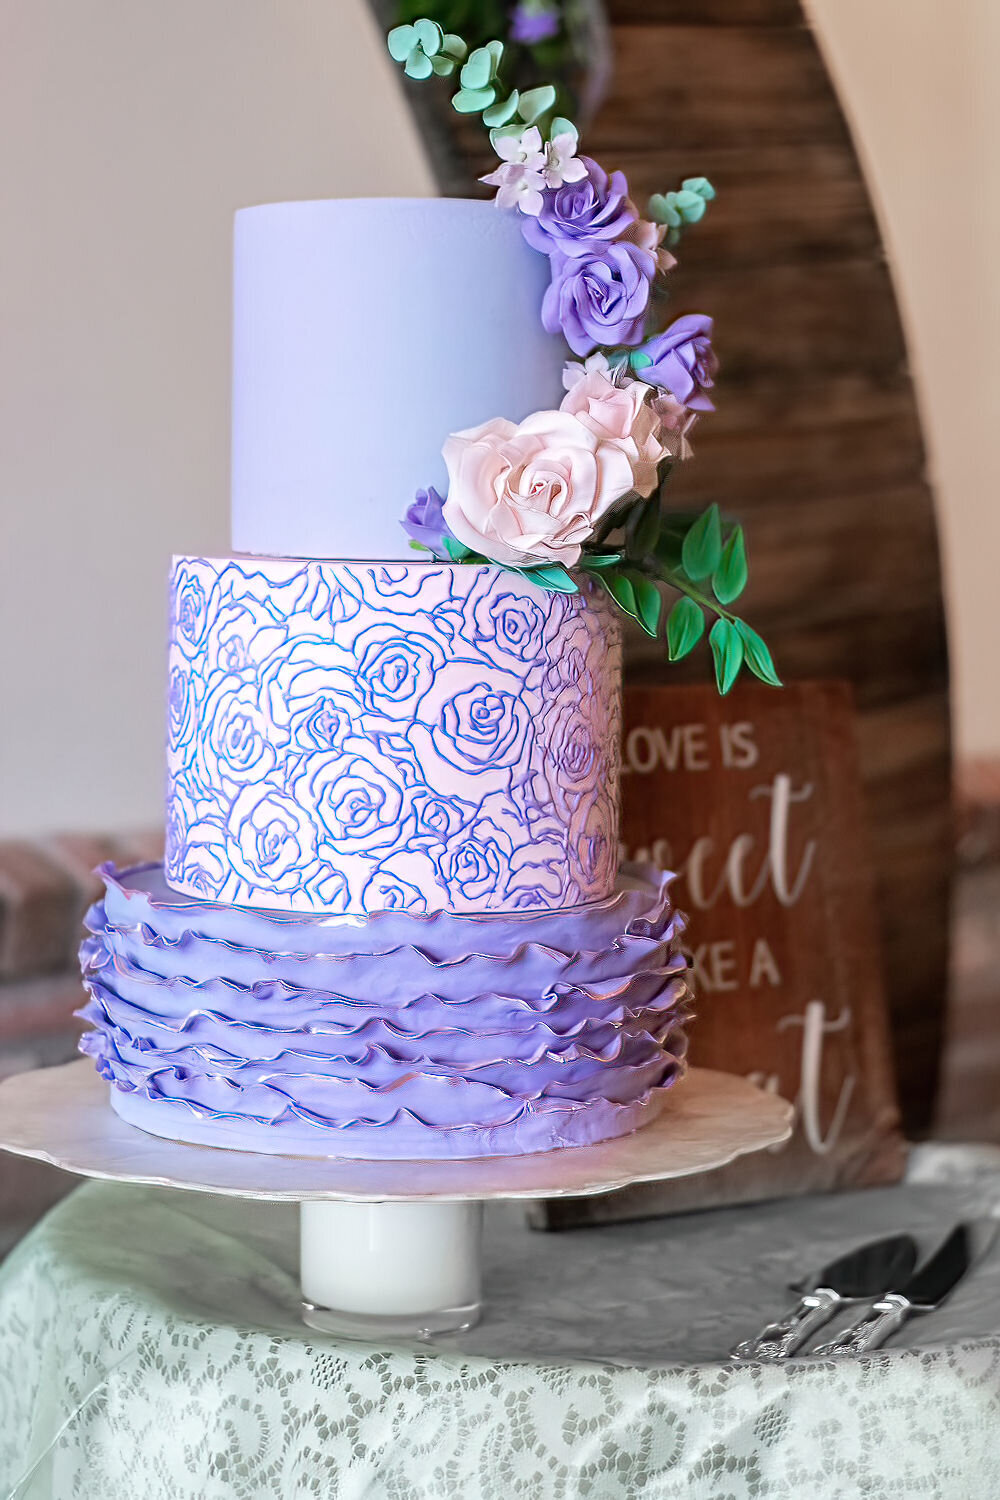 Lavender and pink 3 tier wedding cake. Bottom tier has lavender ruffles edged in pink; middle tier is pink with lavender rose stencil; top tier is lavender with cascading pink and lavender roses,  ruscus and eucalyptus leaves